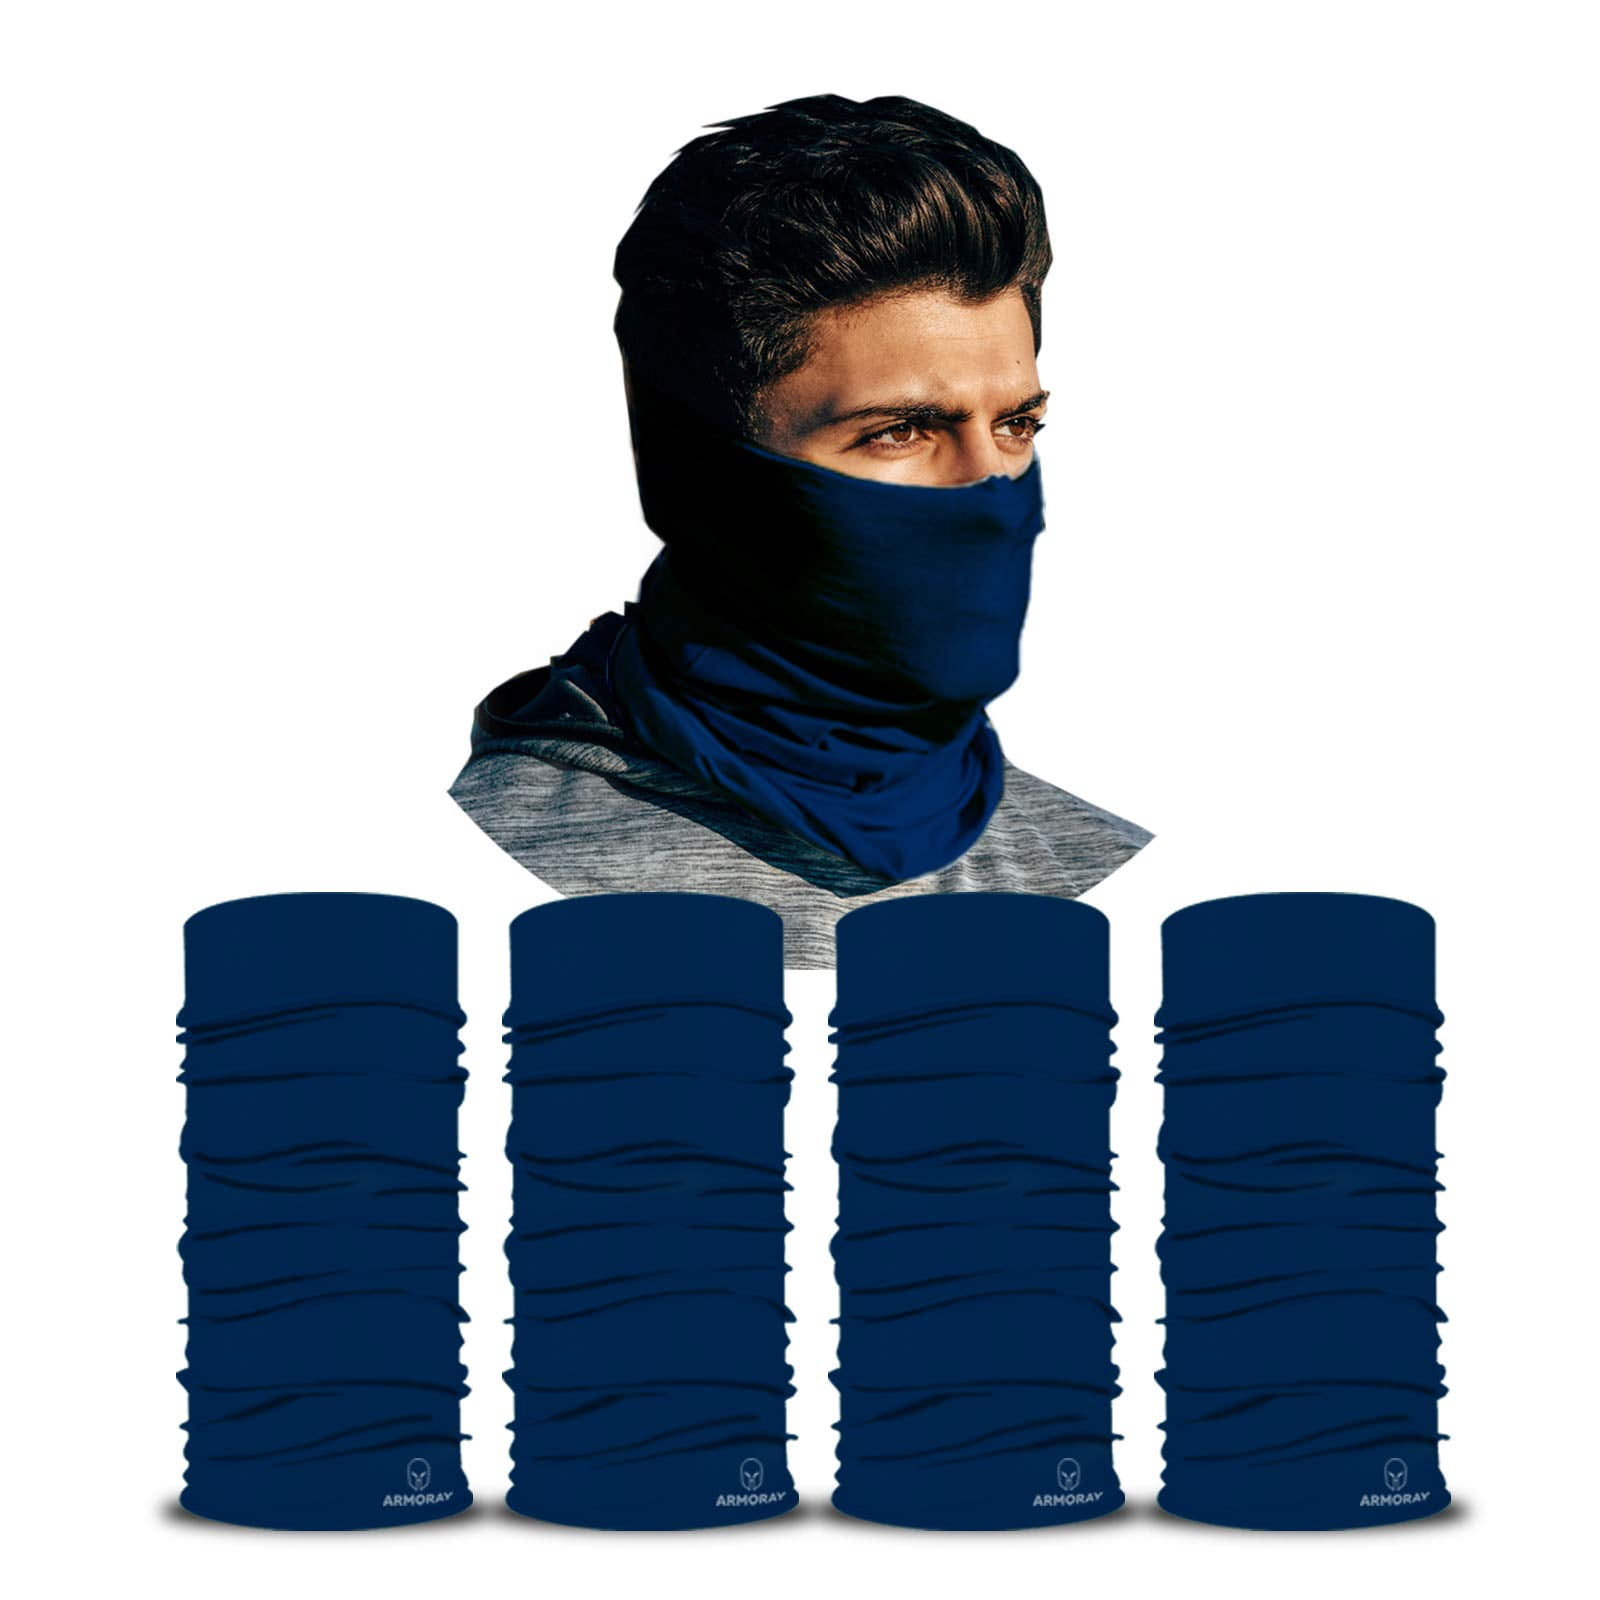 Multi-purpose Face Cover For Women Men Sports/Outdoors 10 pcs Scarf Bandanas Neck Gaiter with Safety Carbon Filters 